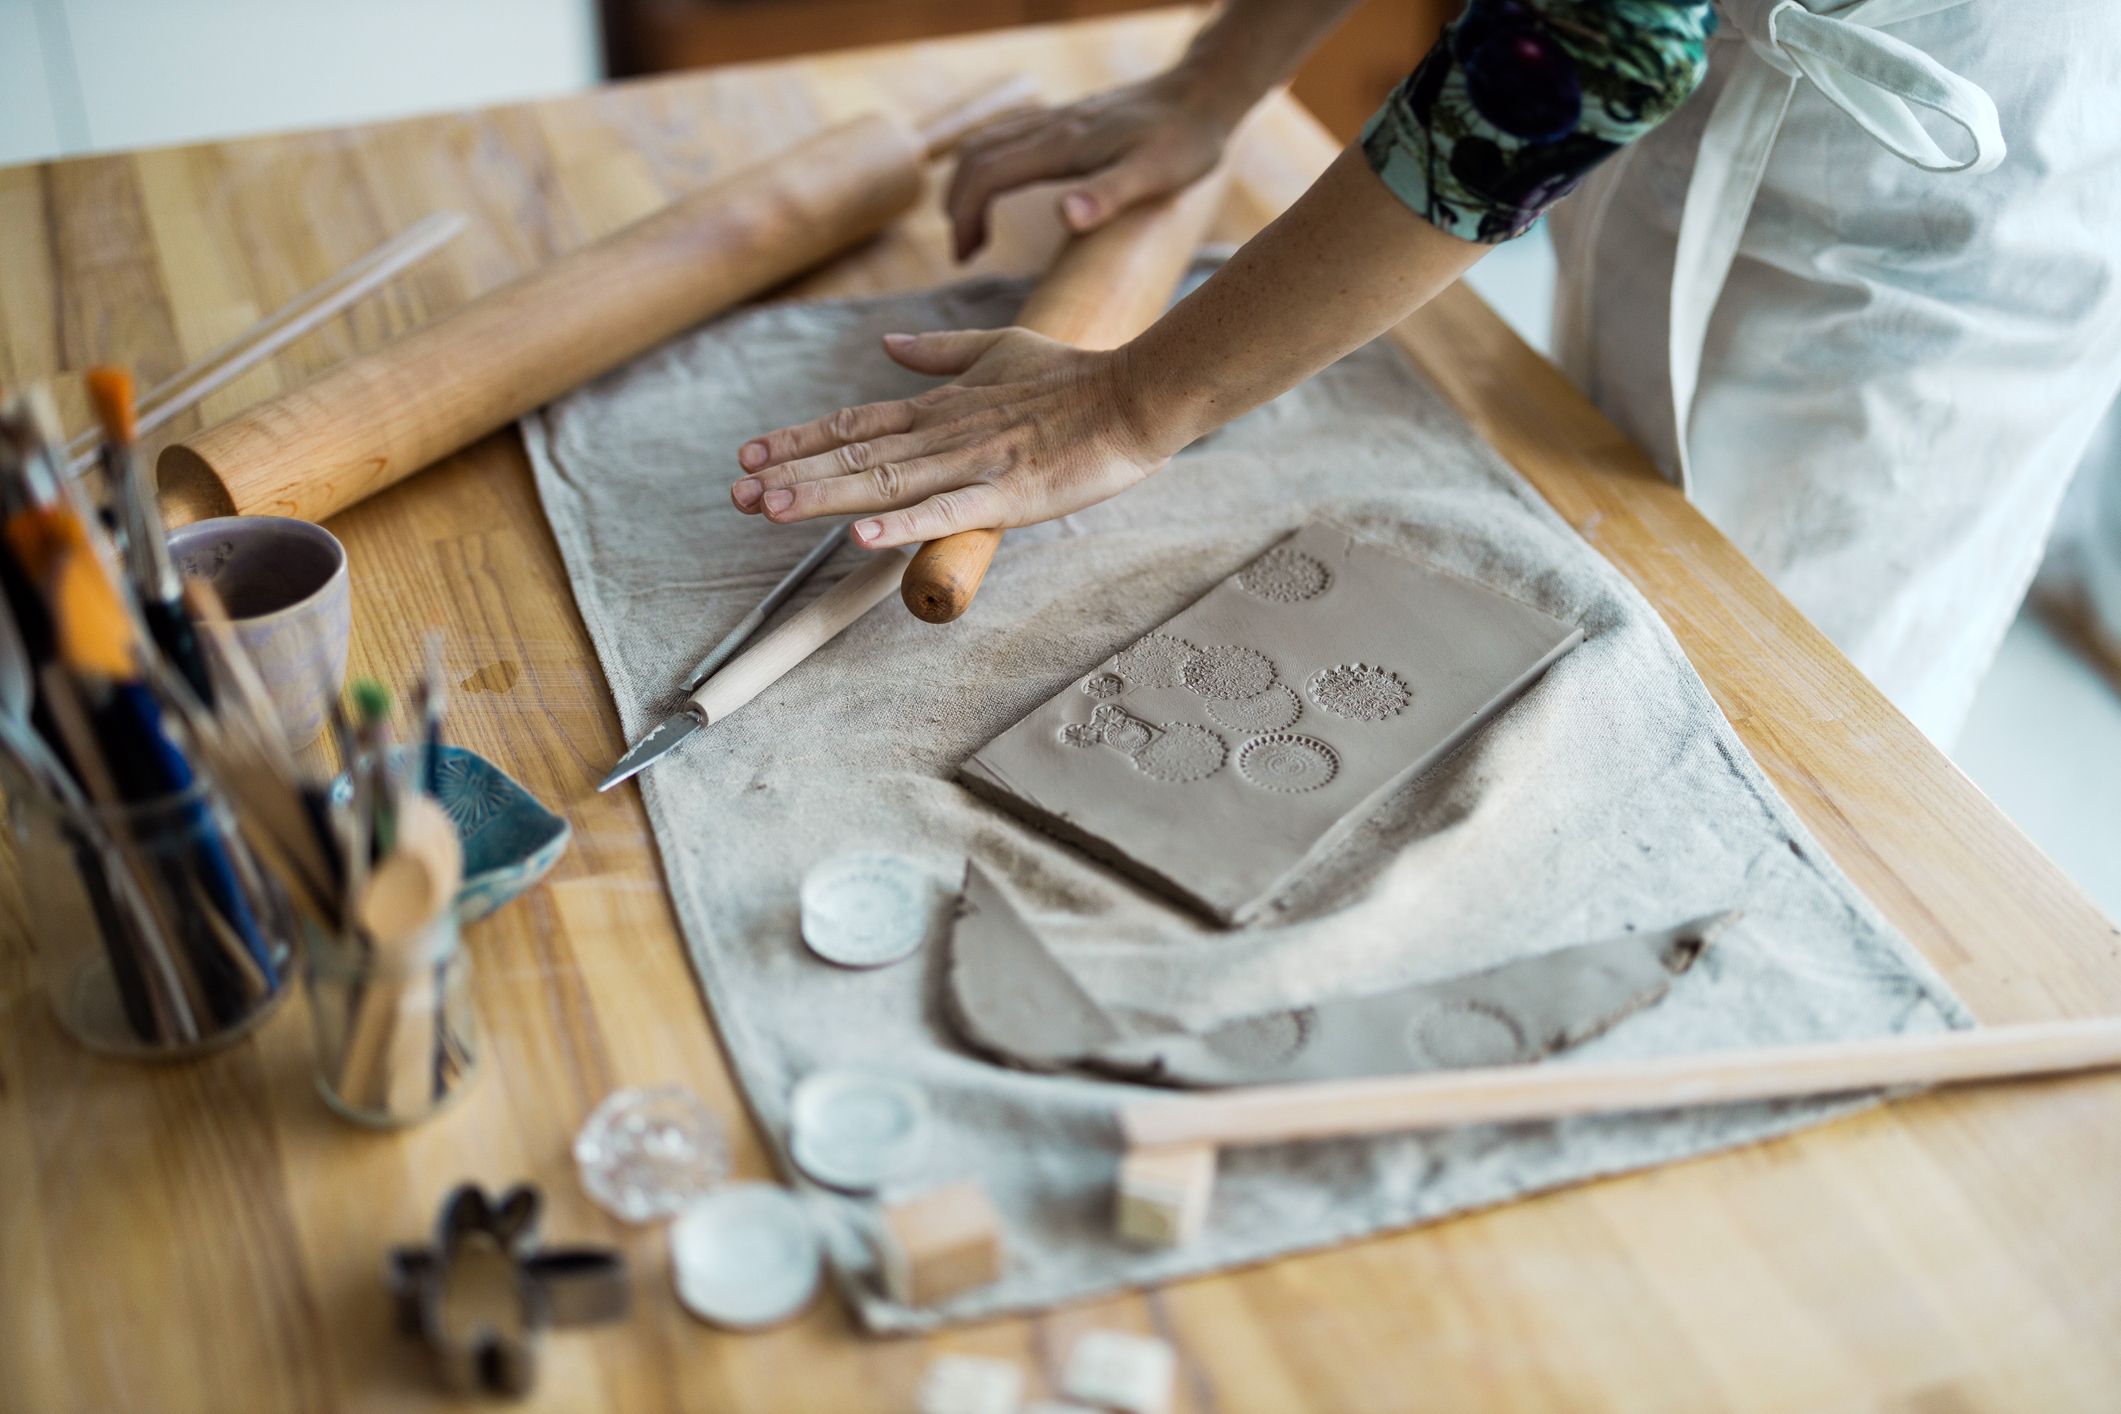 A beginner's guide to air dry clay